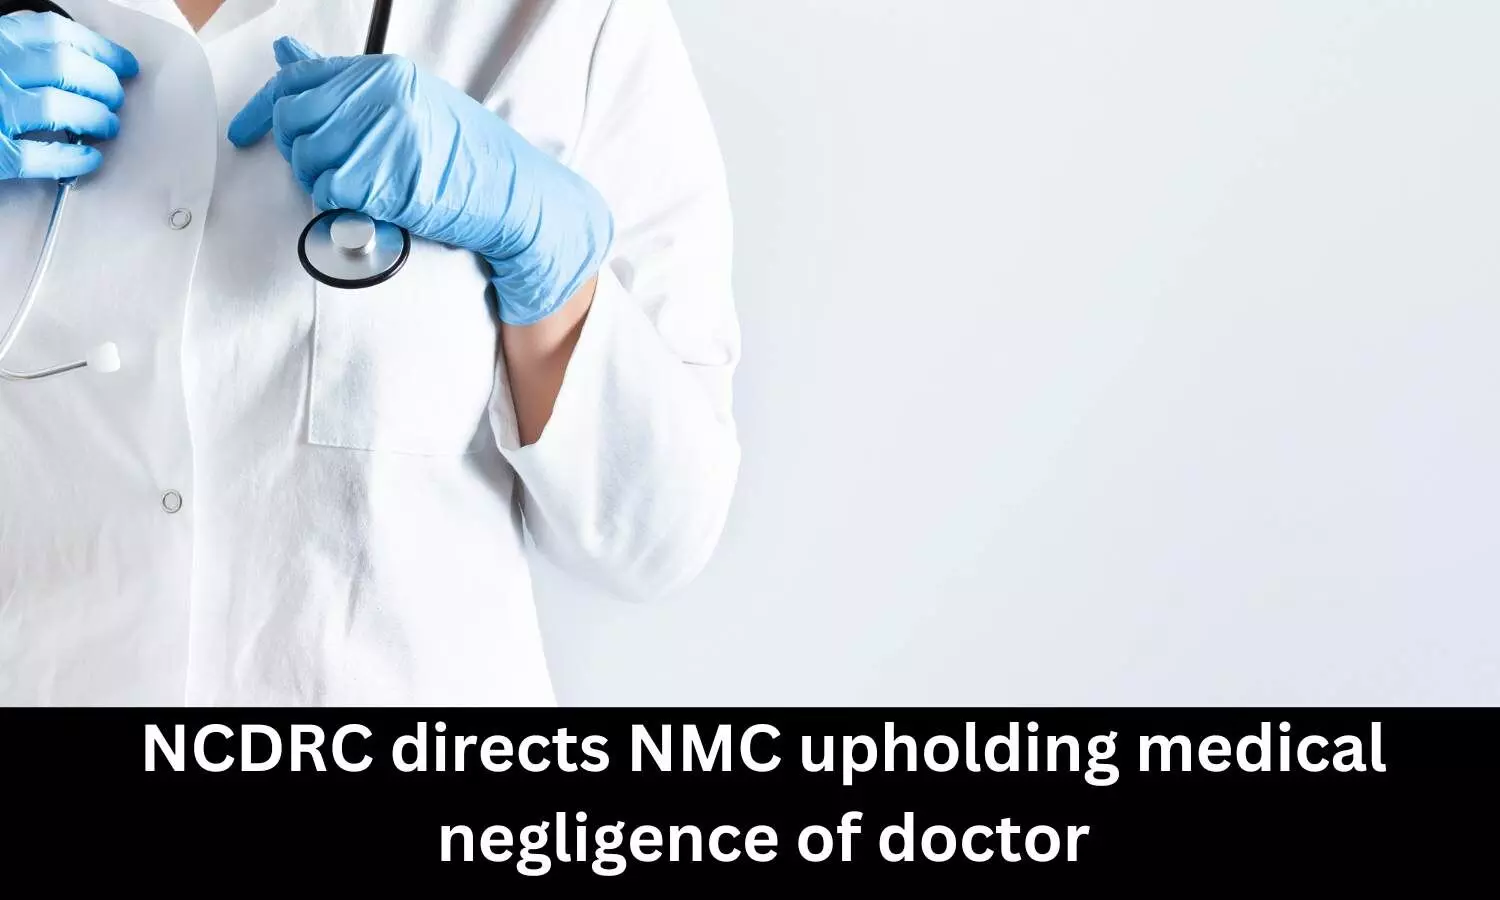 Formulate stringent guidelines to regulate antenatal USG protocols: NCDRC directs NMC upholding medical negligence of doctor